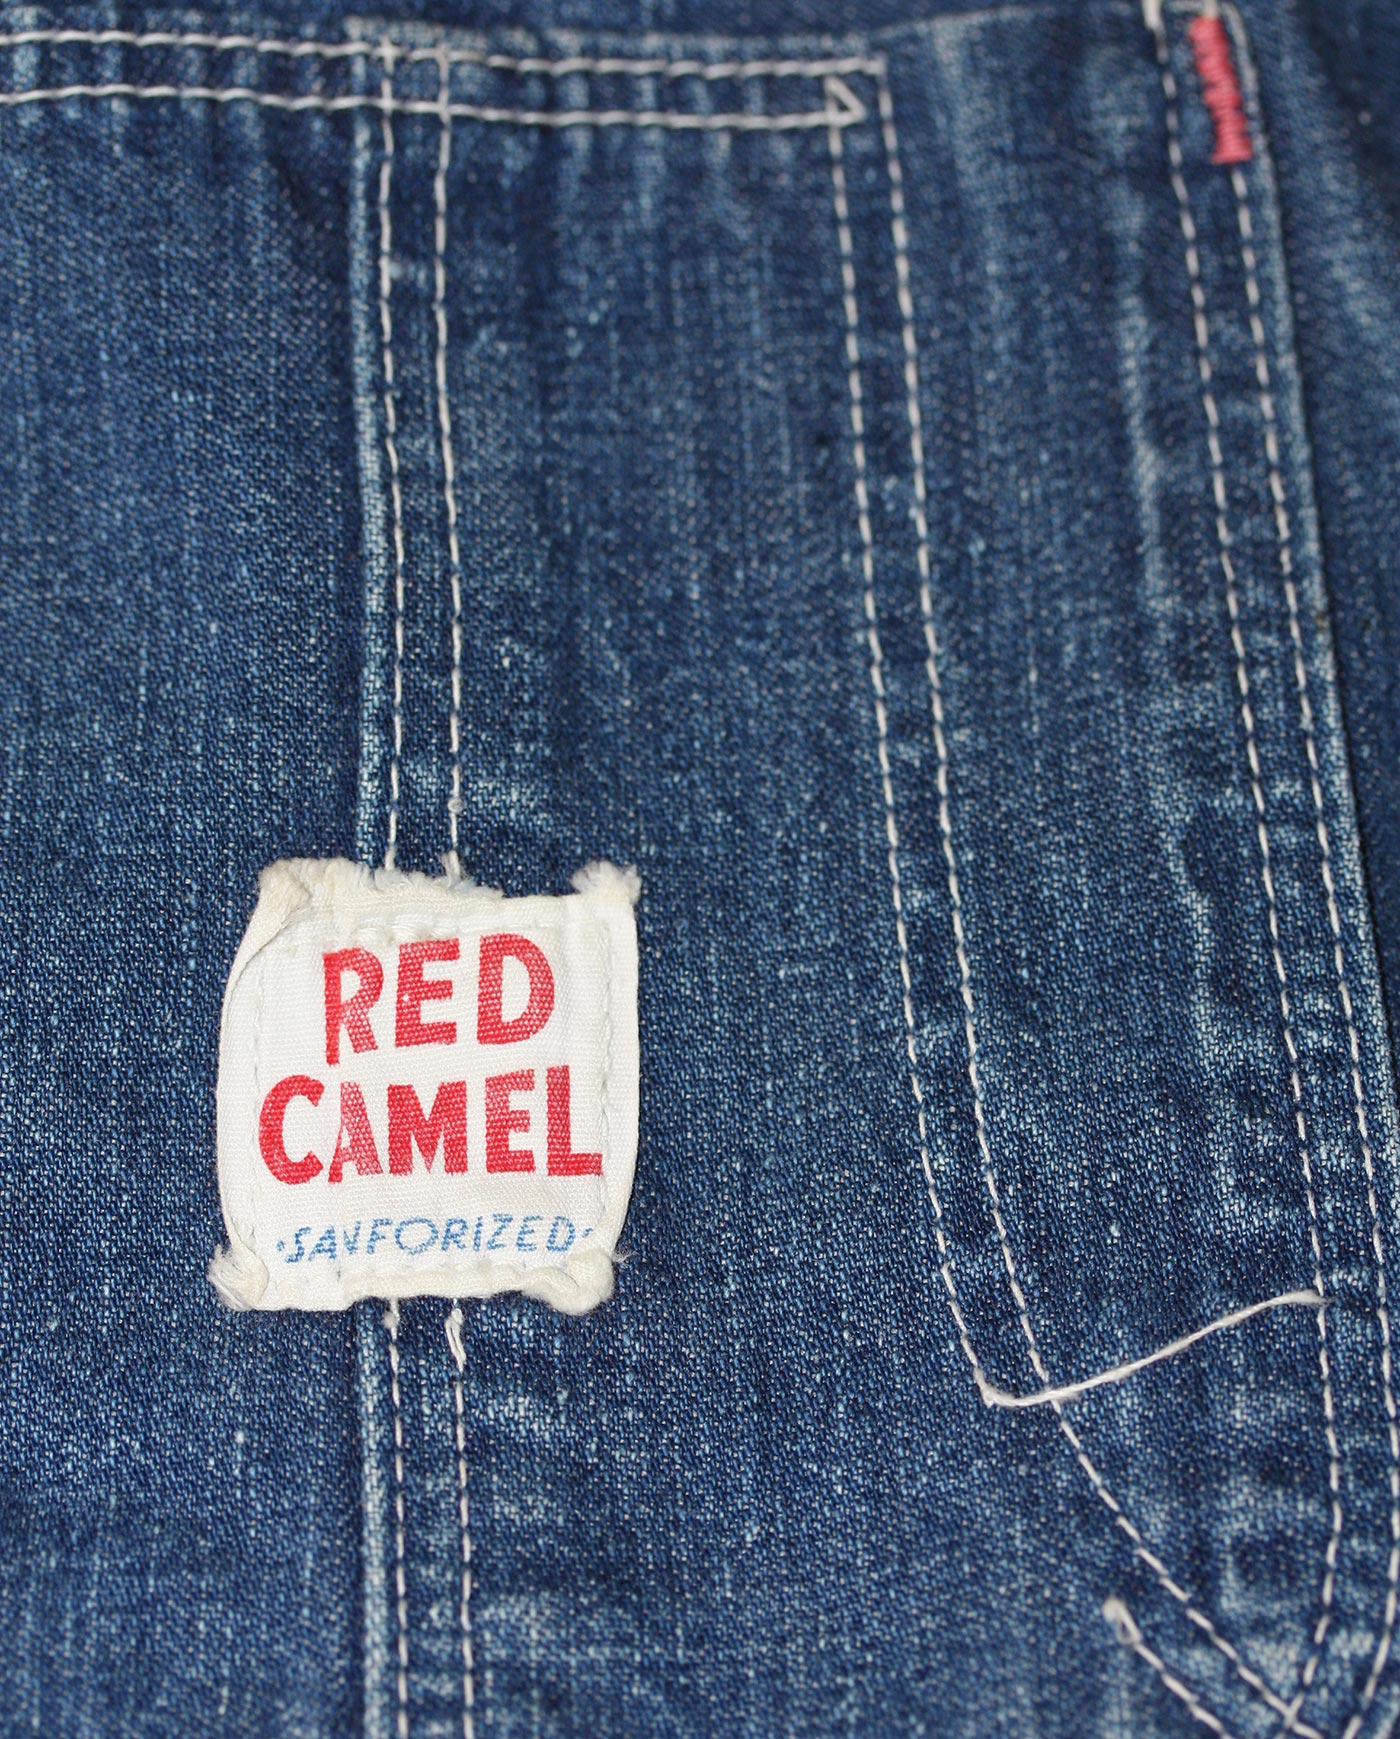 red camel jeans